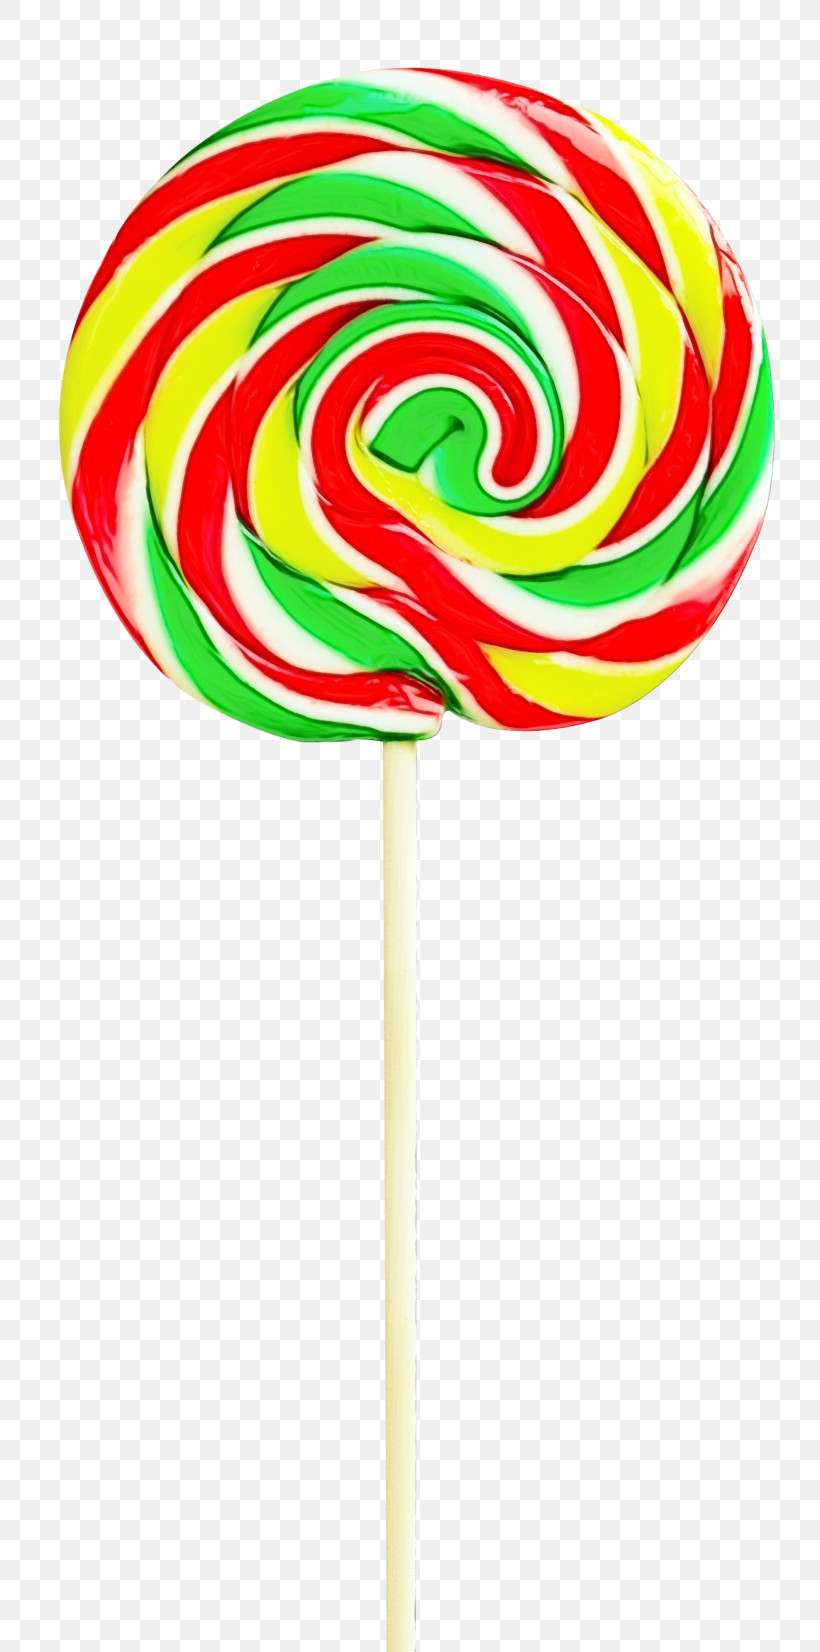 Lollipop Confectionery Candy Rock Candy Chupa Chups, PNG, 800x1652px, Watercolor, Candy, Chupa Chups, Chupa Chups Lollipop, Chupa Chups Lollipops Download Free